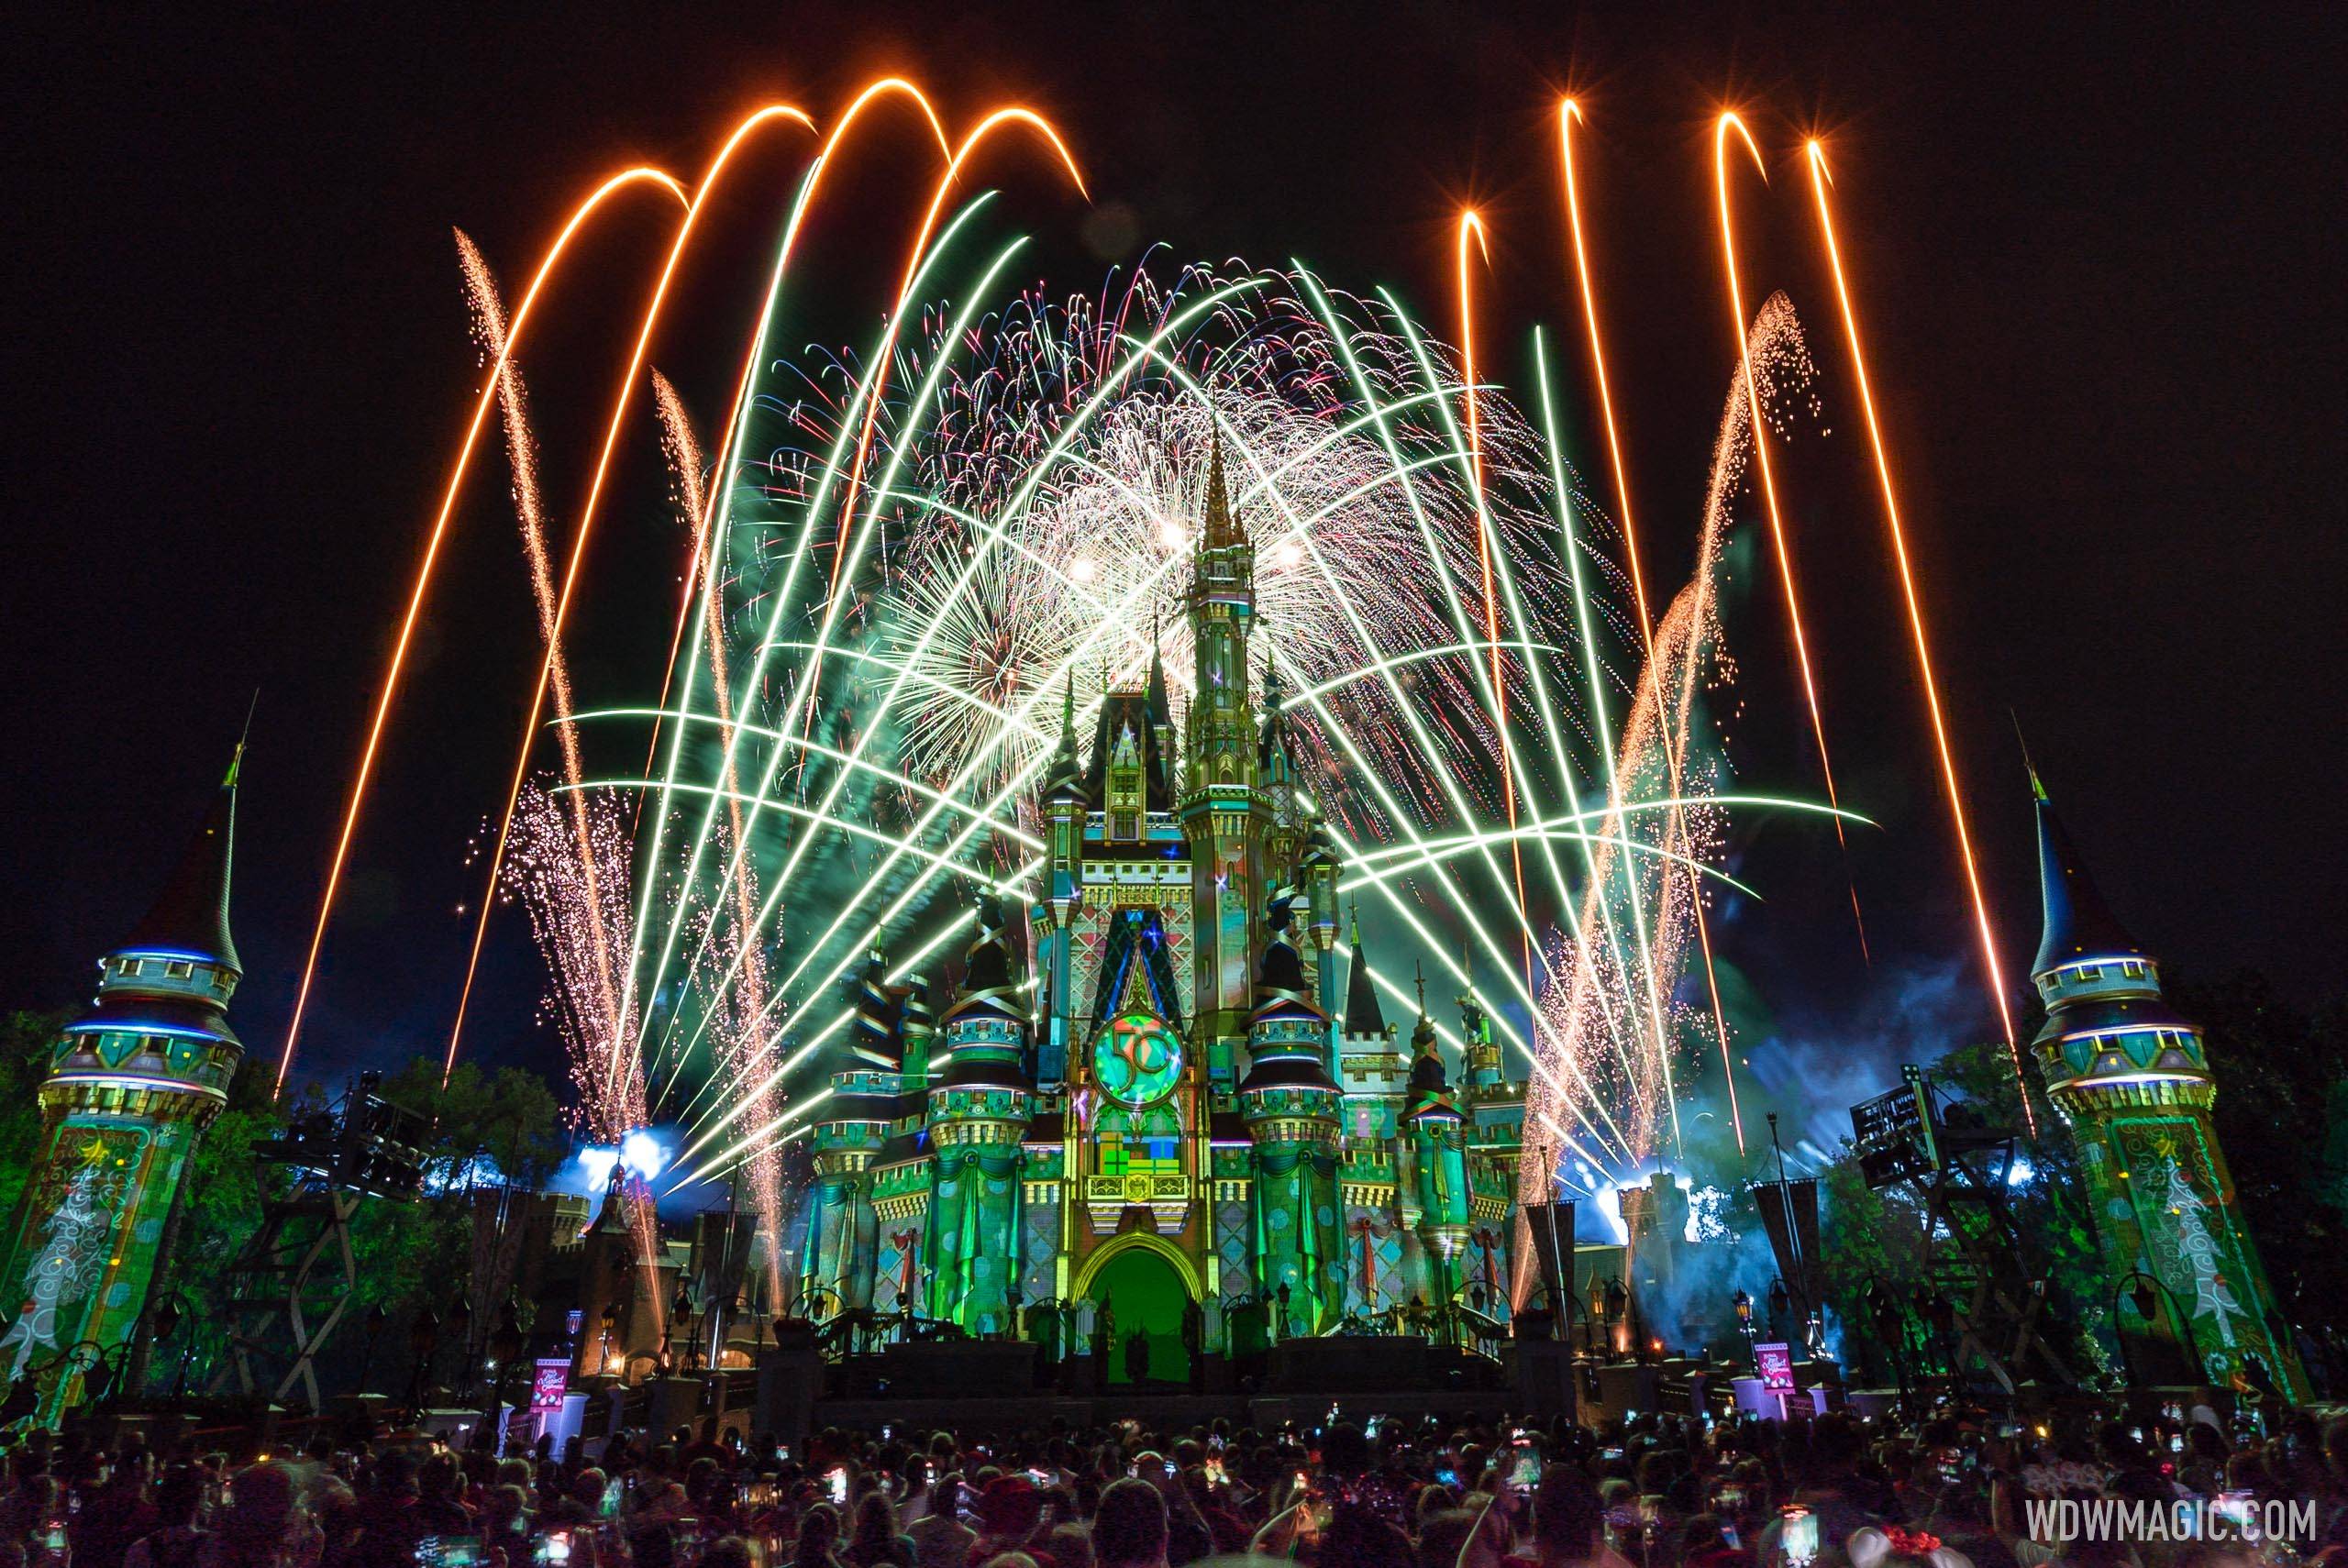 VIDEO - Minnie's Wonderful Christmastime Fireworks from Mickey's Very Merry Christmas Party